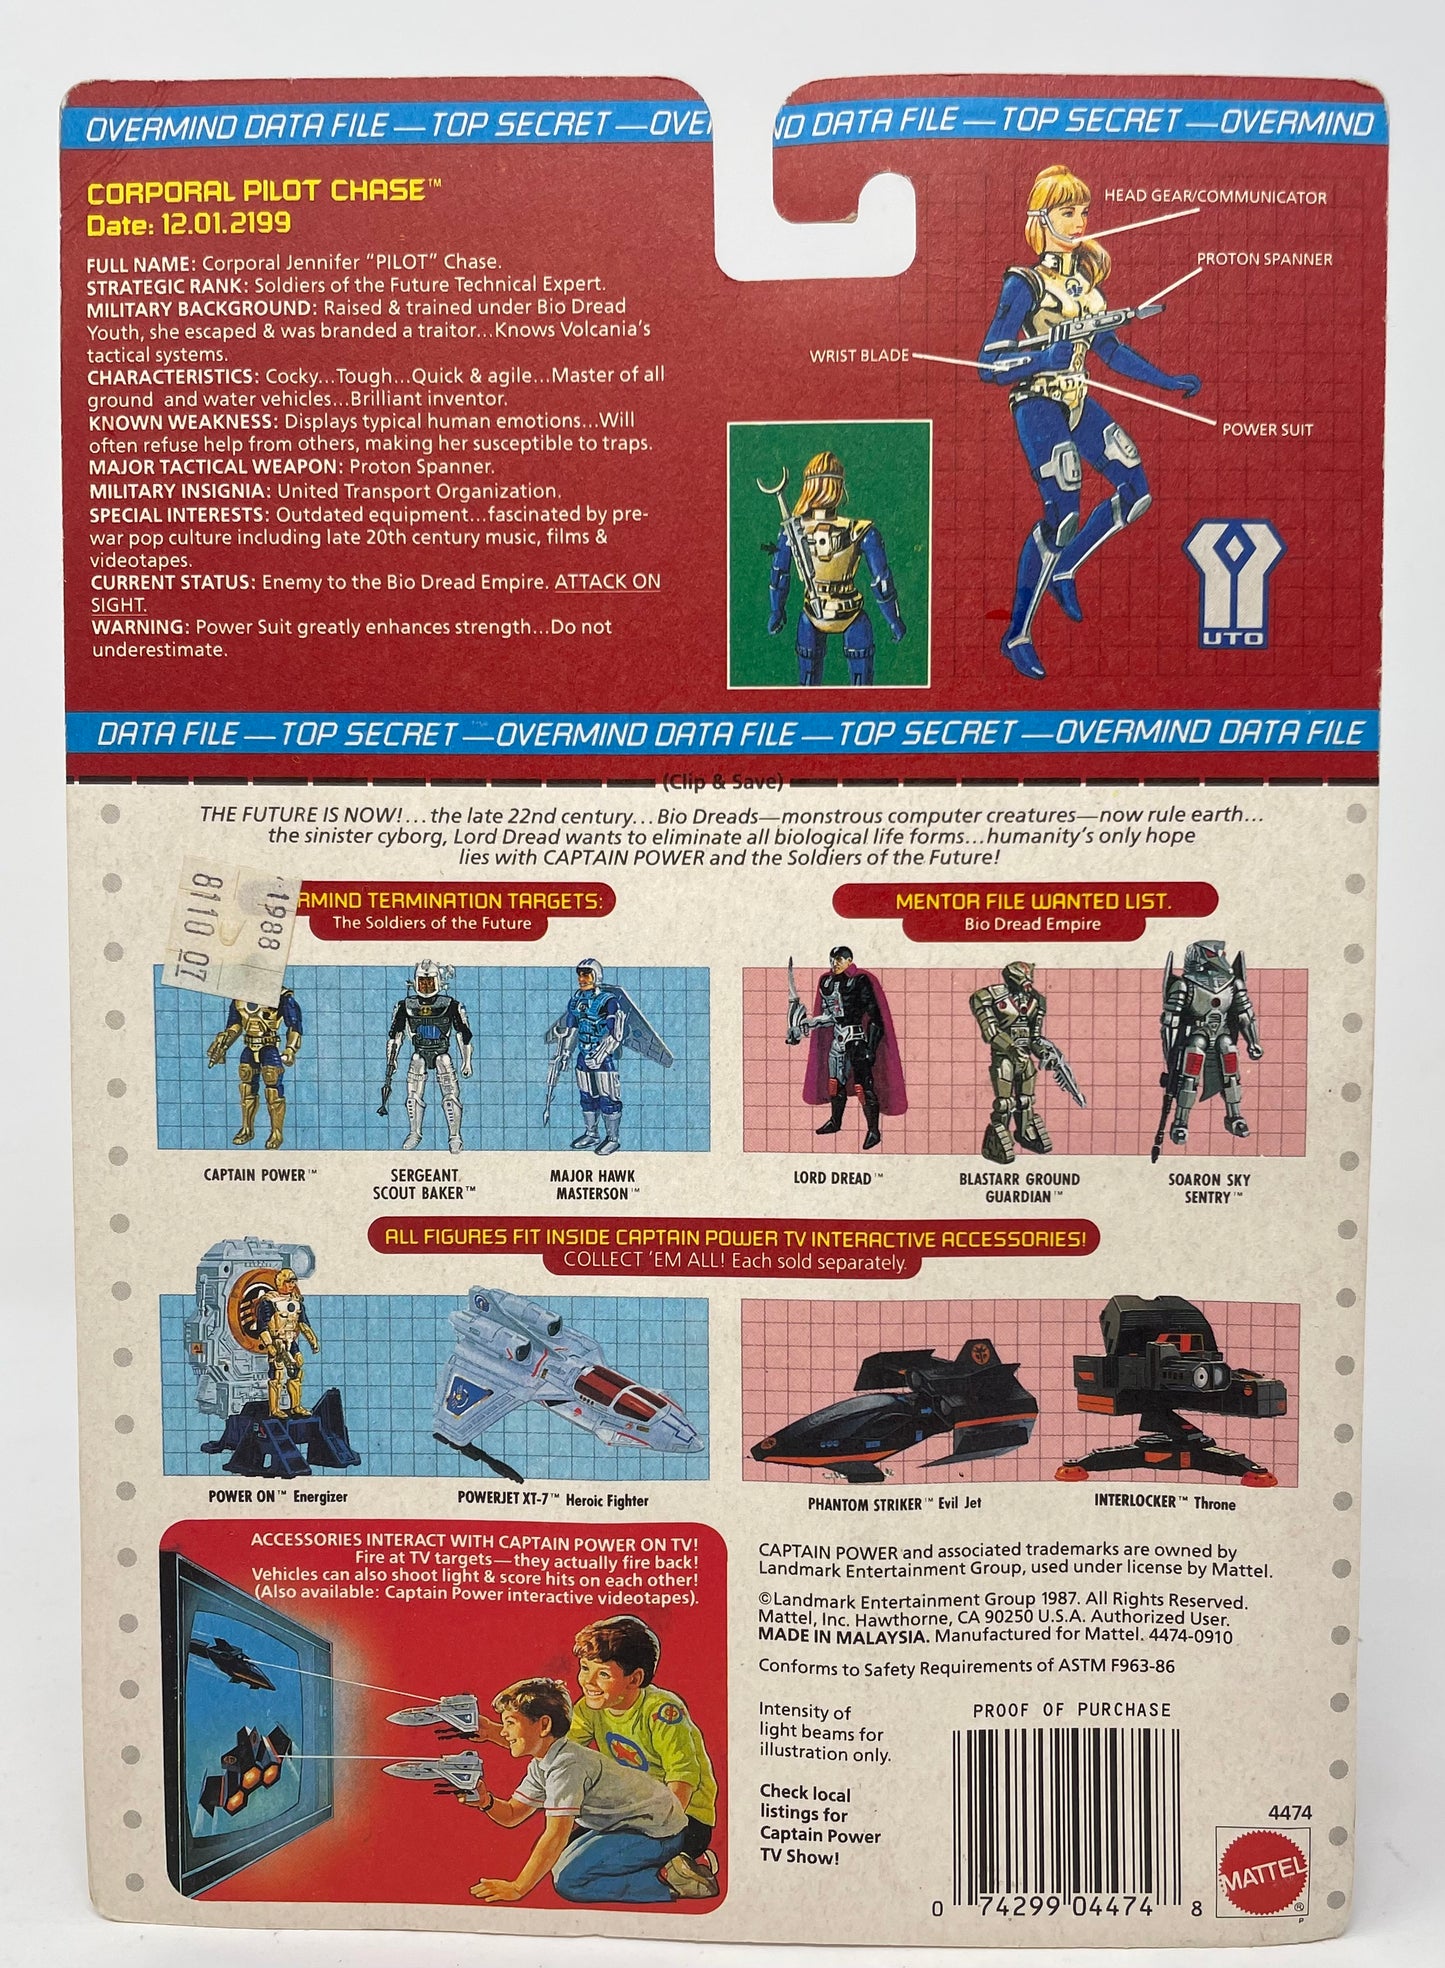 CORPORAL PILOT CHASE - CAPTAIN POWER AND THE SOLDIERS OF THE FUTURE - #4474 - MATTEL 1987 (1 OF 2)